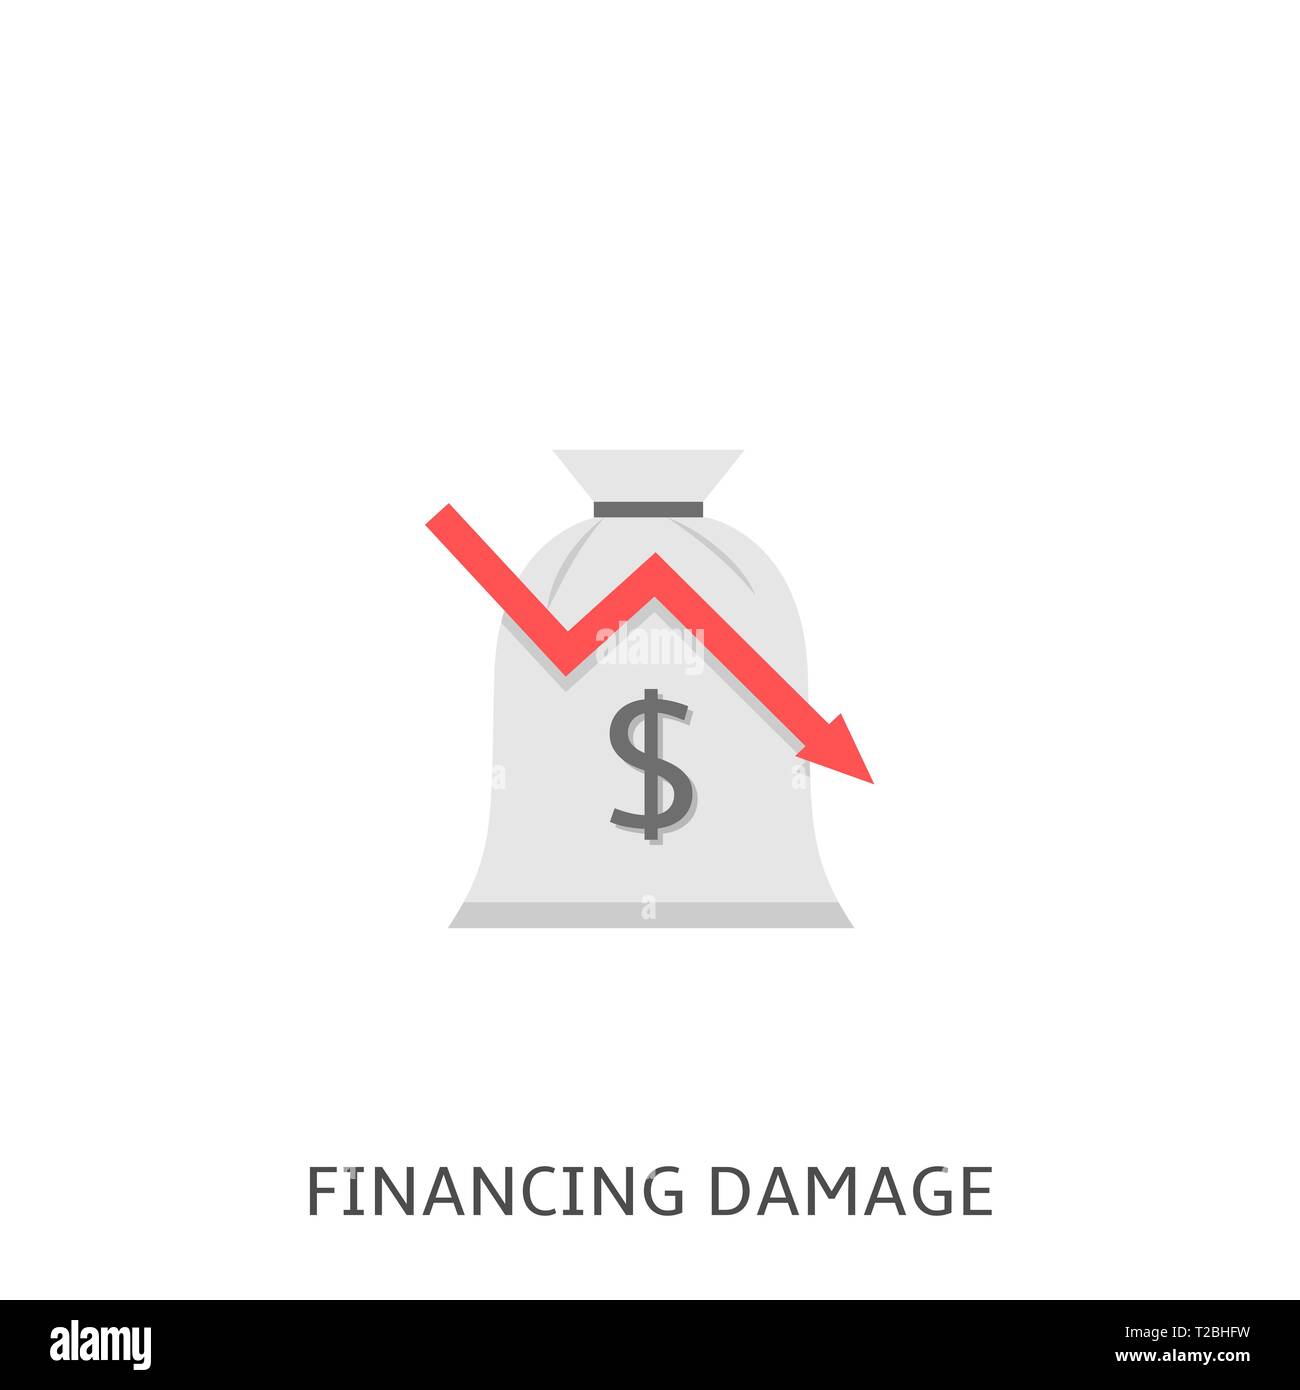 Financial damage. Money bag with dollar sign and red decline arrow symbol Vector illustration Stock Vector